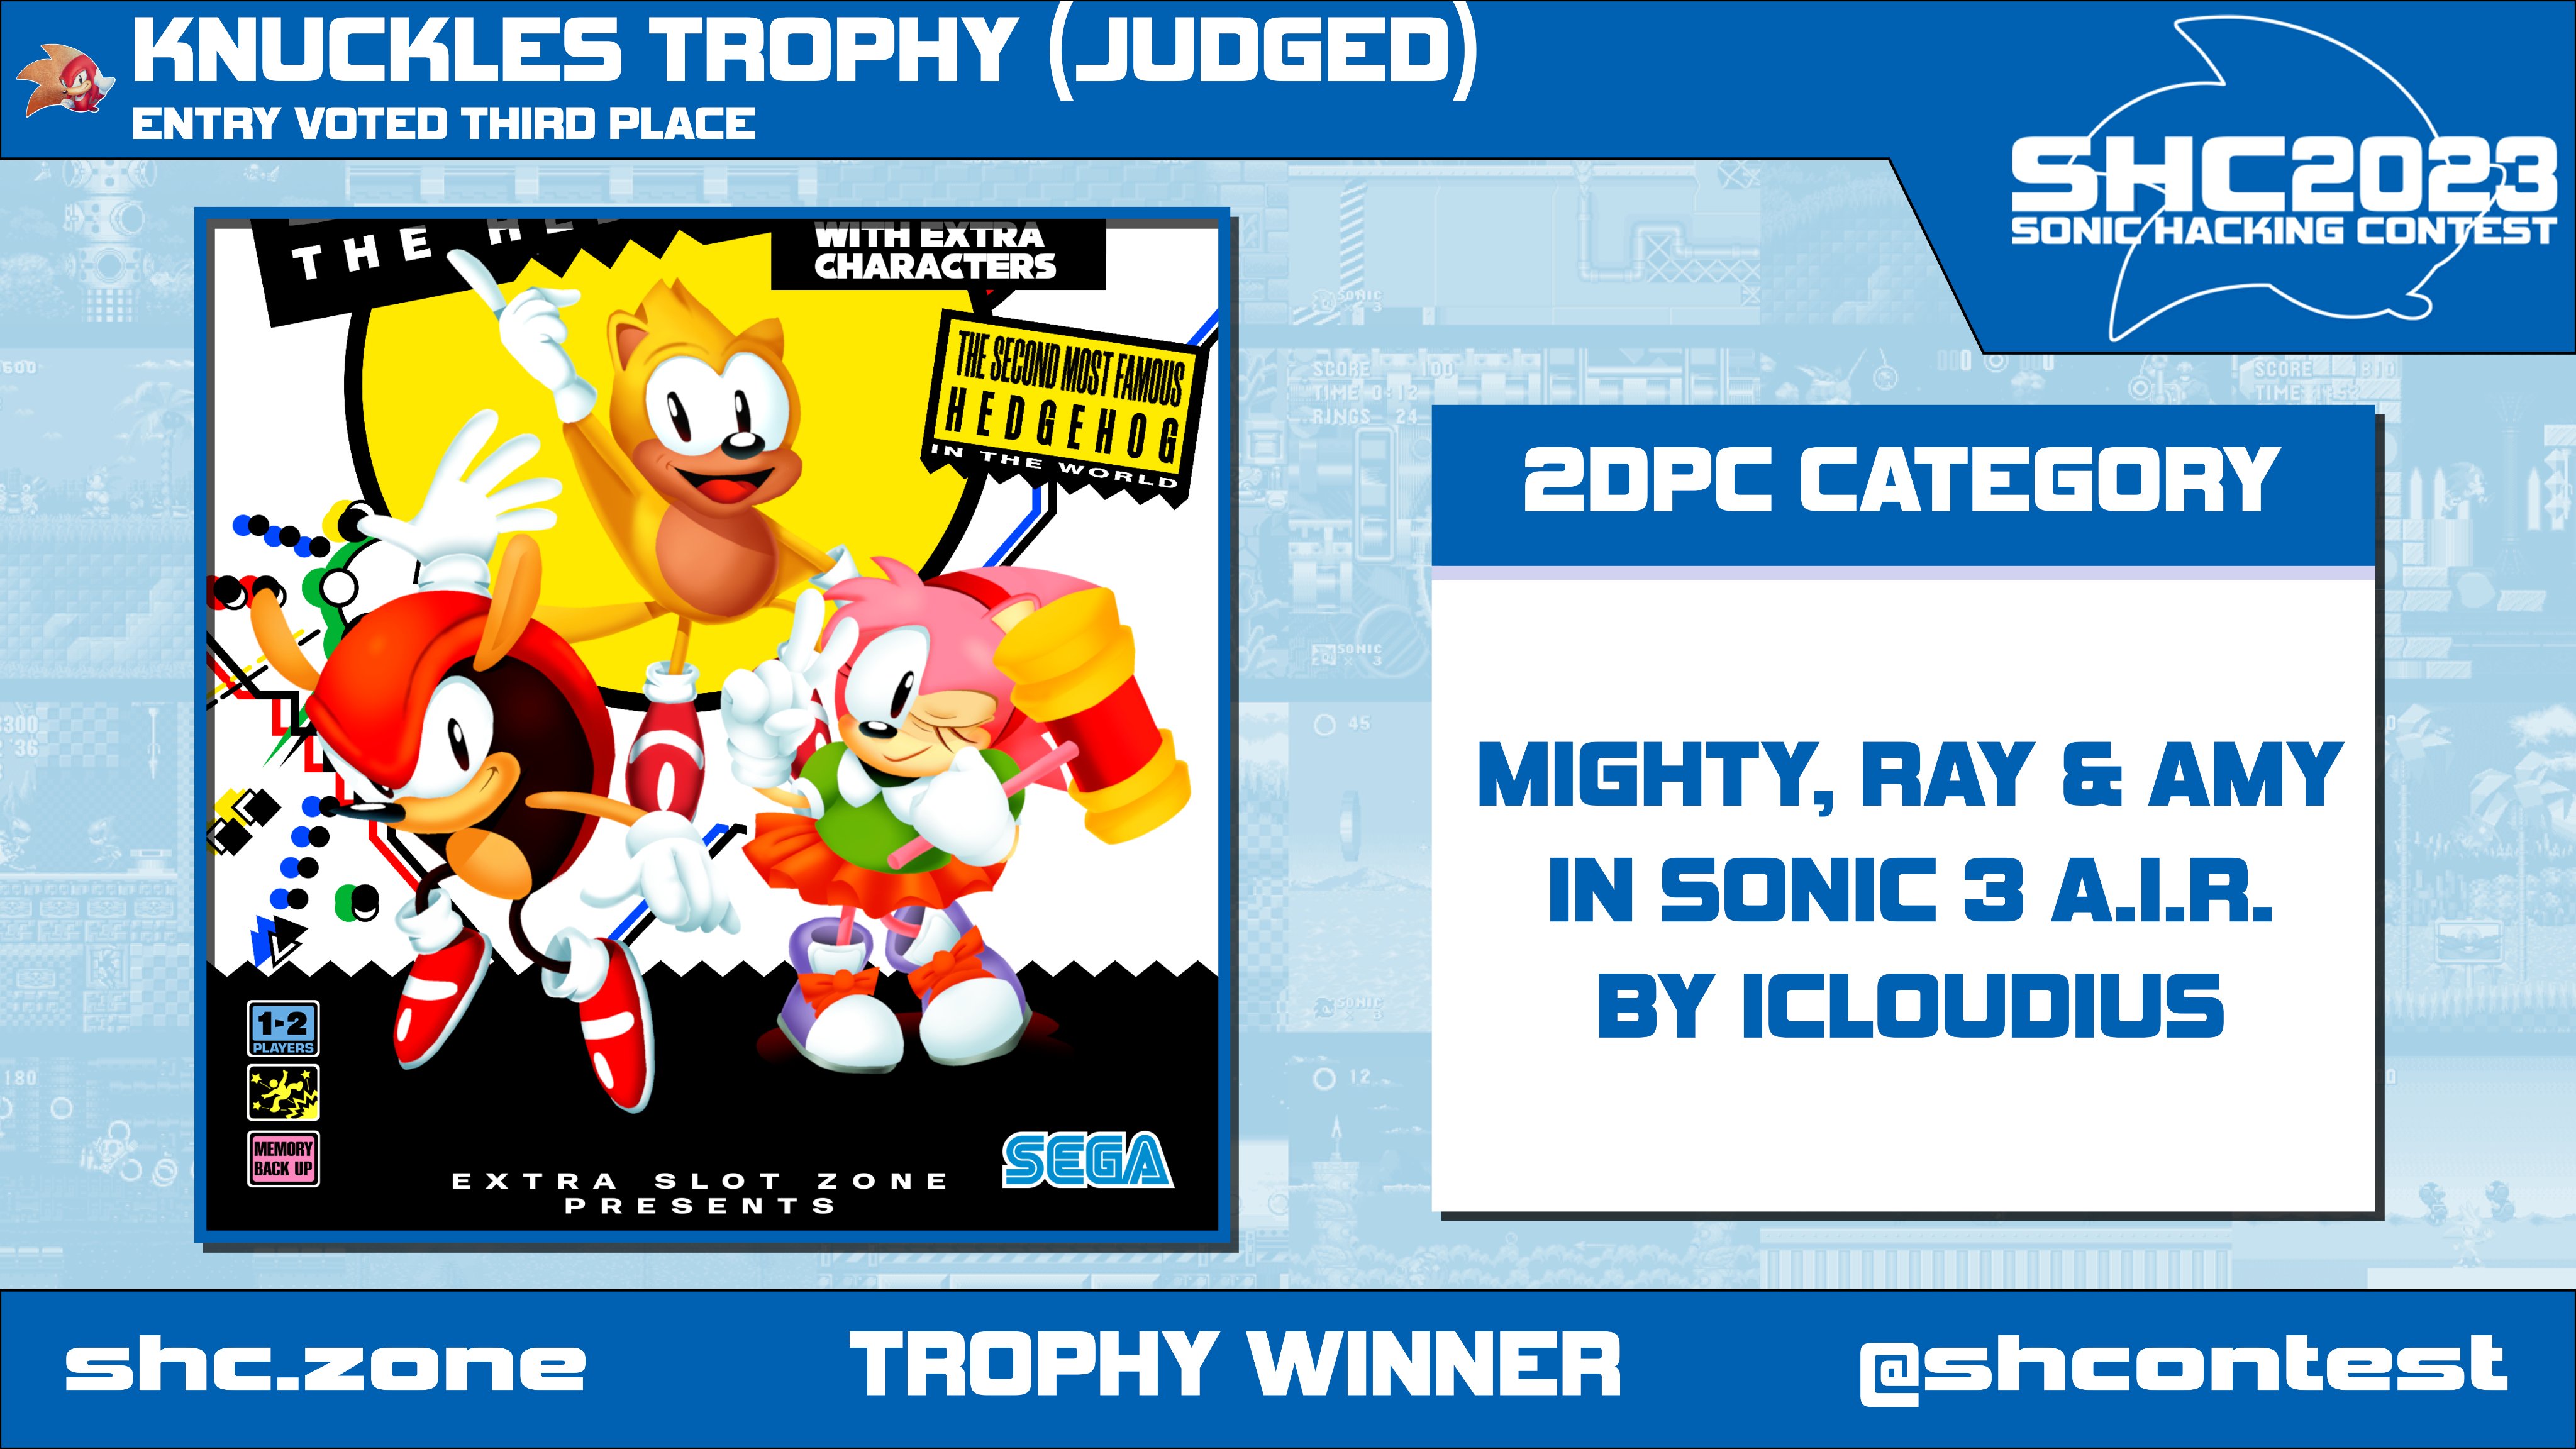 Sonic Hacking Contest :: The SHC2023 Contest :: Mighty, Ray, & Amy